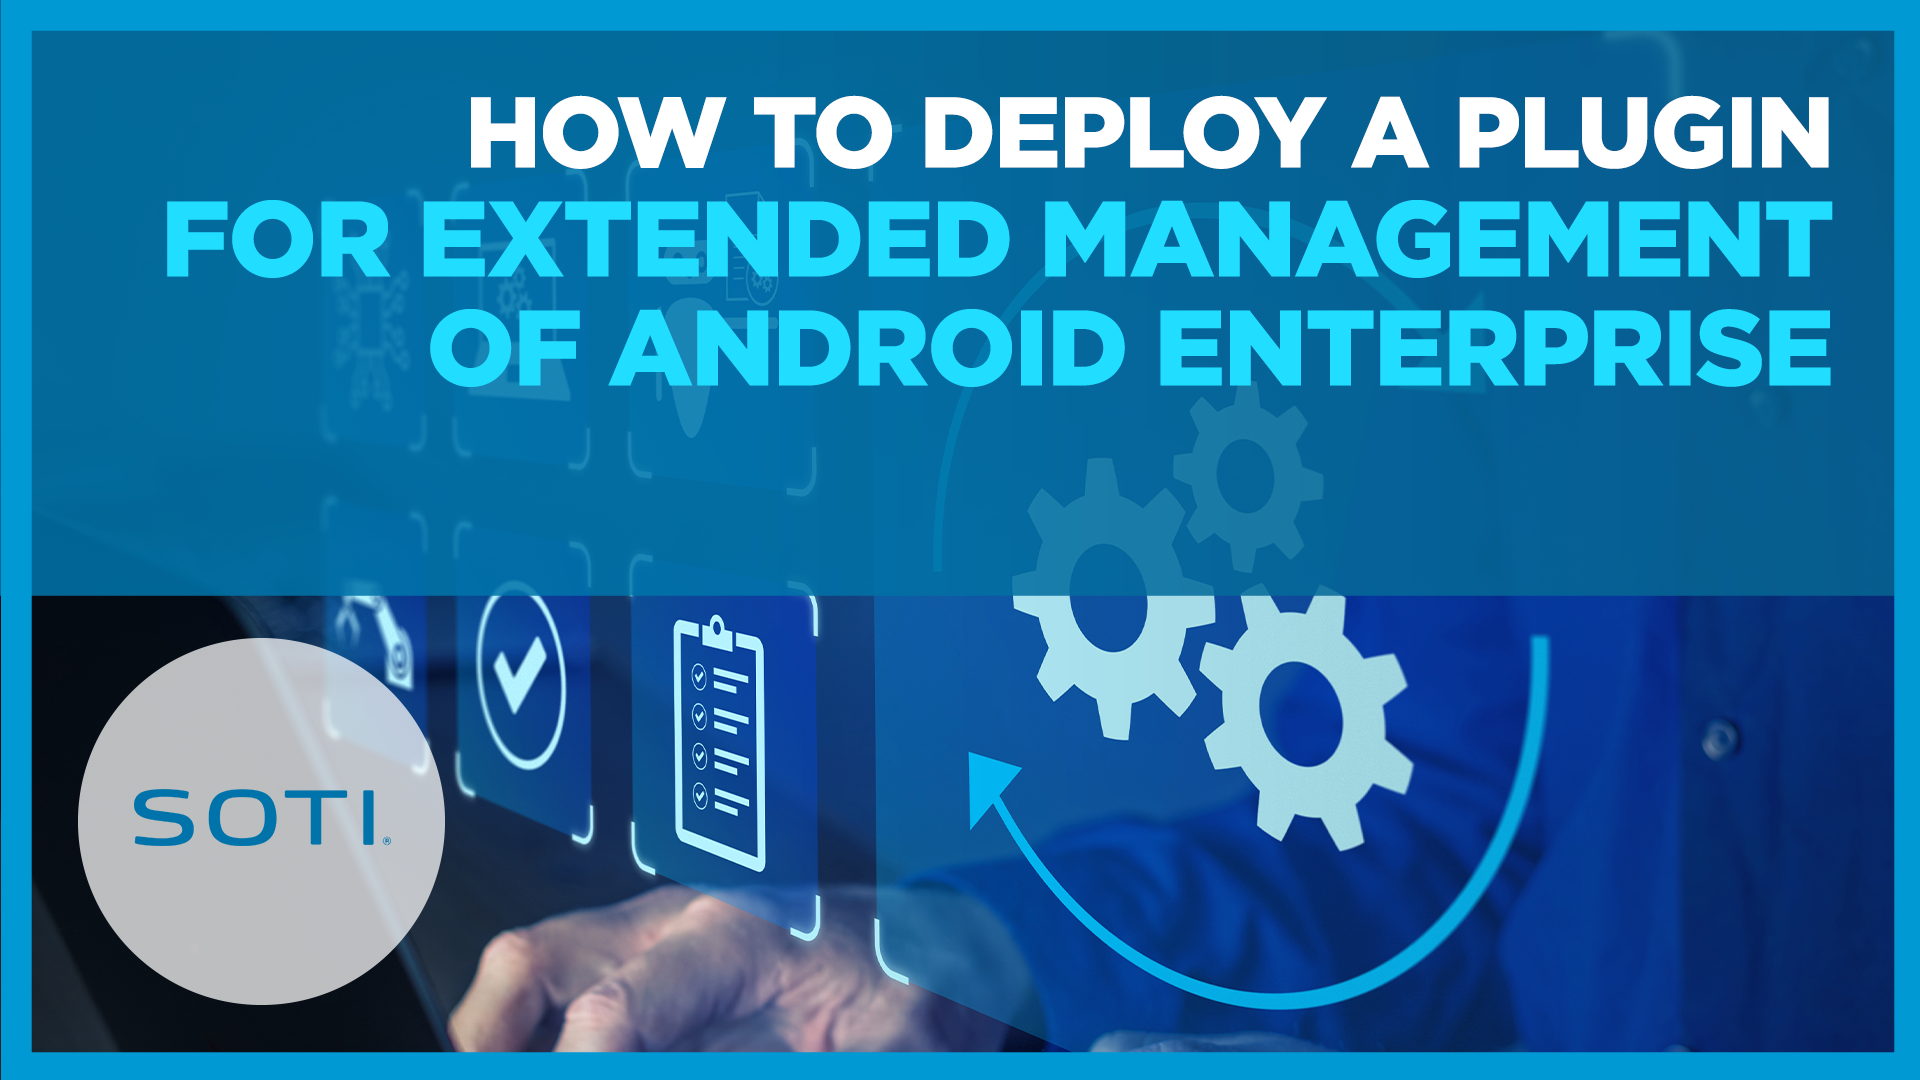 Deploying a Plugin for Extended Management of Android Enterprise Devices